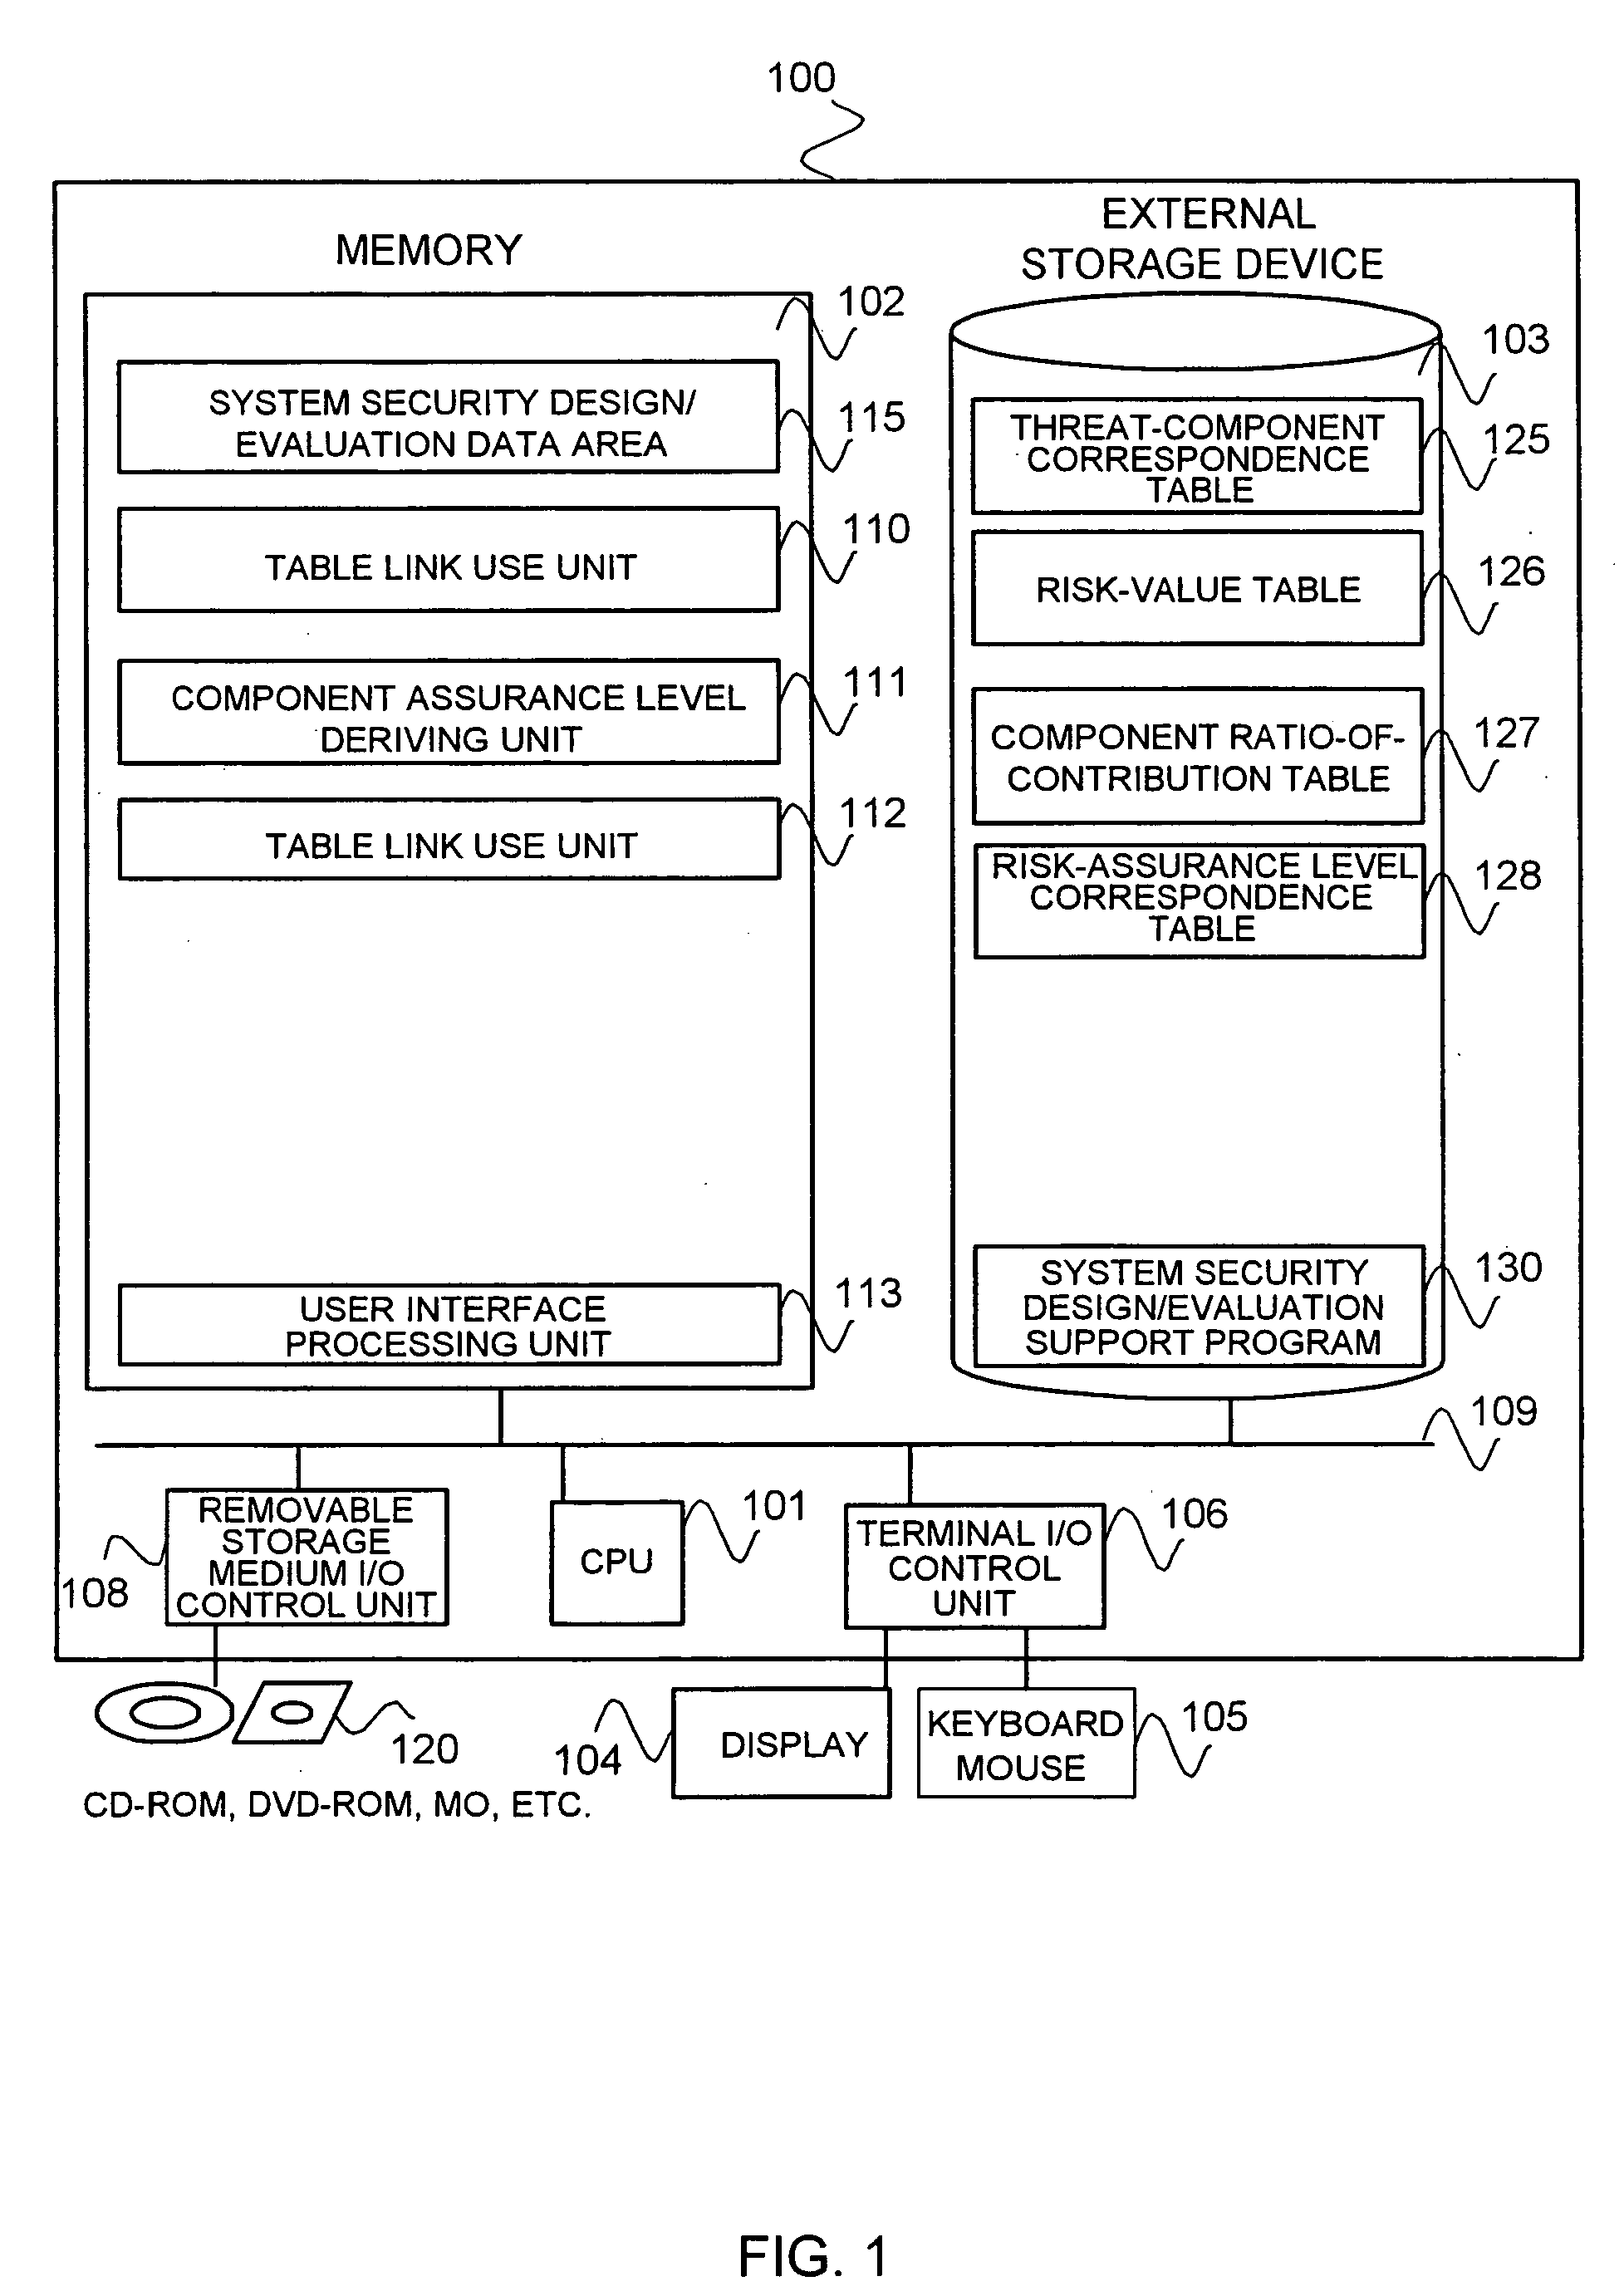 Tool, method, and program for supporting system security design/evaluation